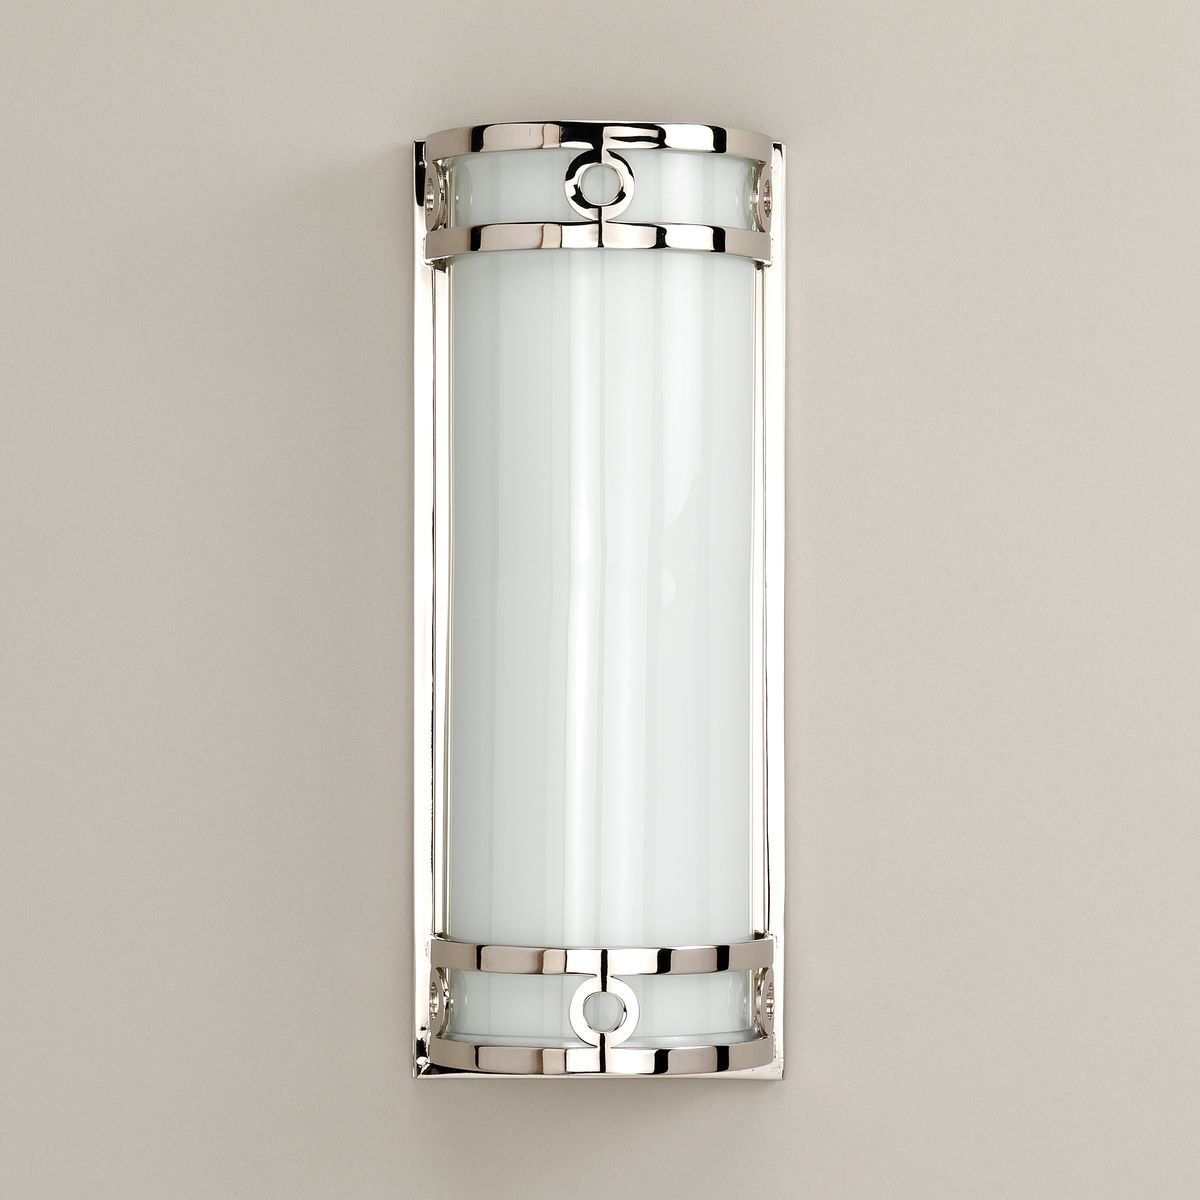 Nickel and glass art deco style wall light